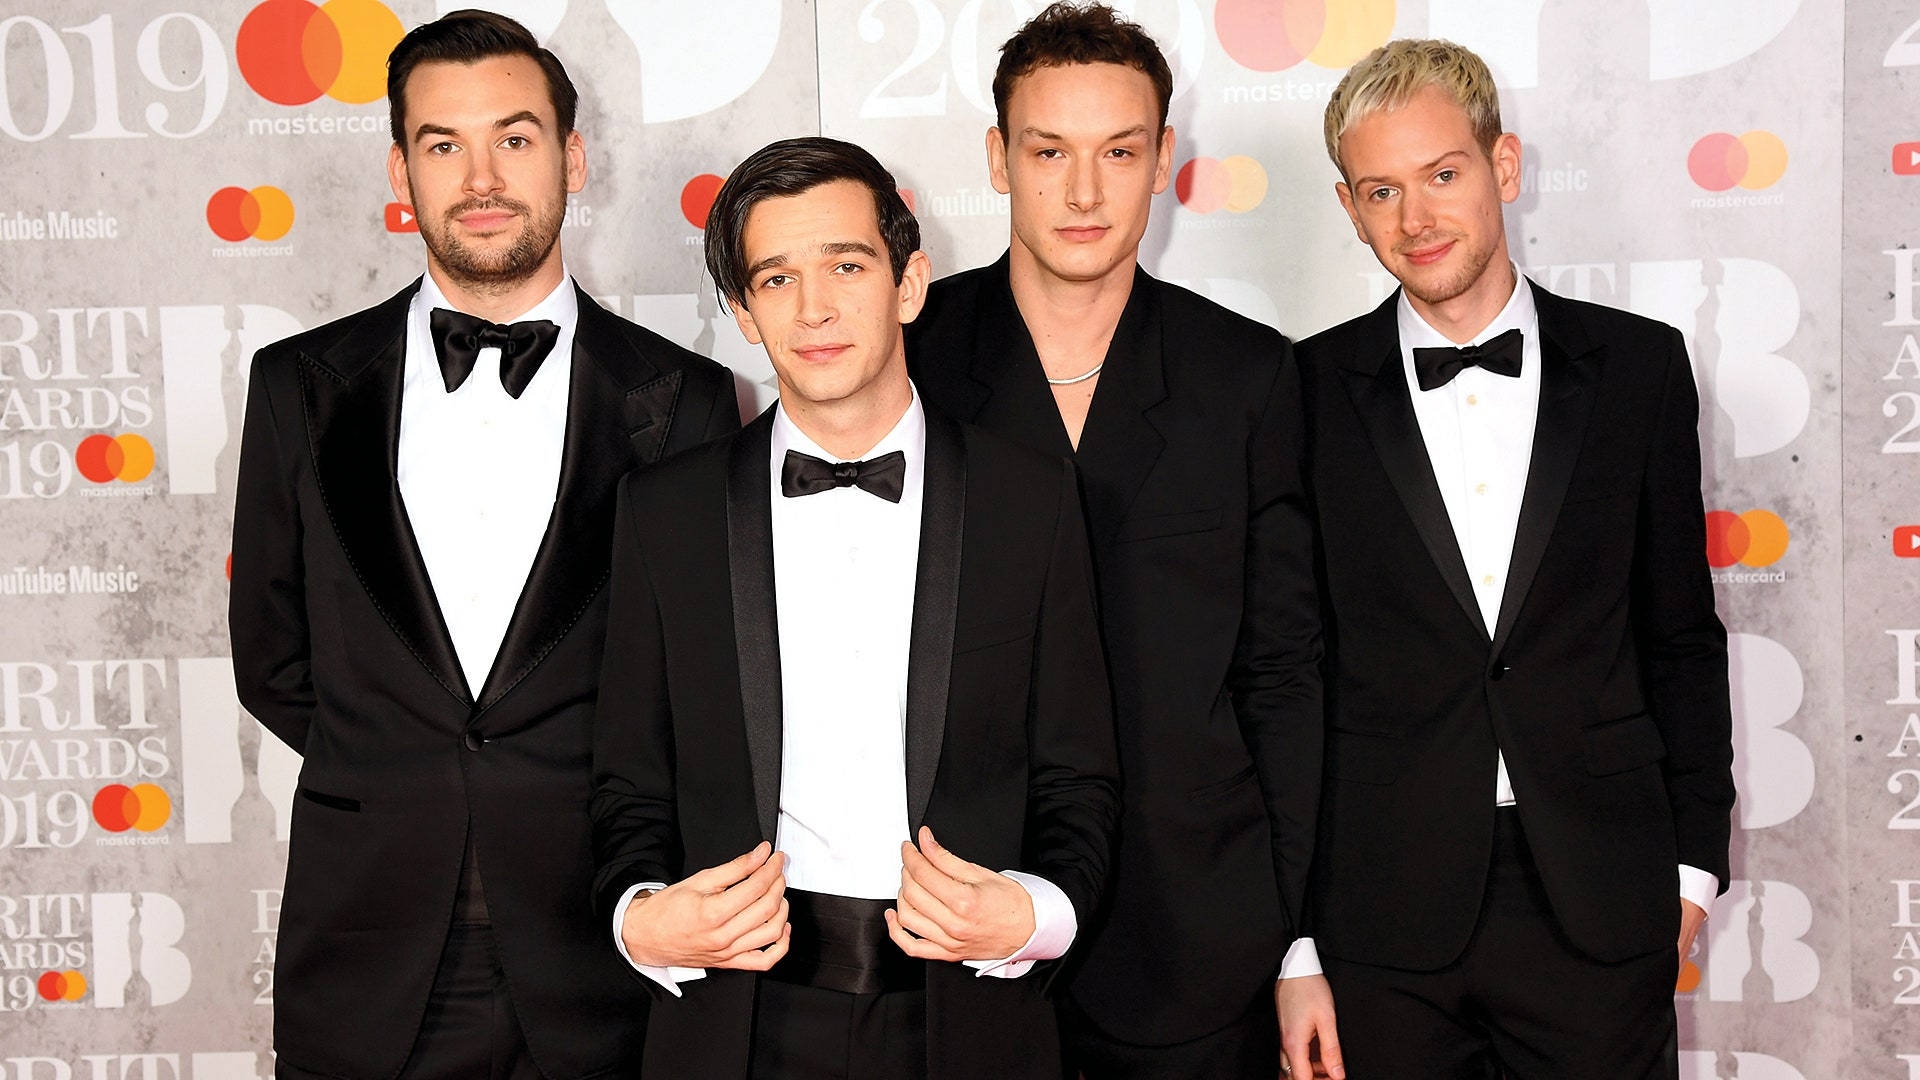 The 1975 Band In Tuxedo Suit Wallpaper